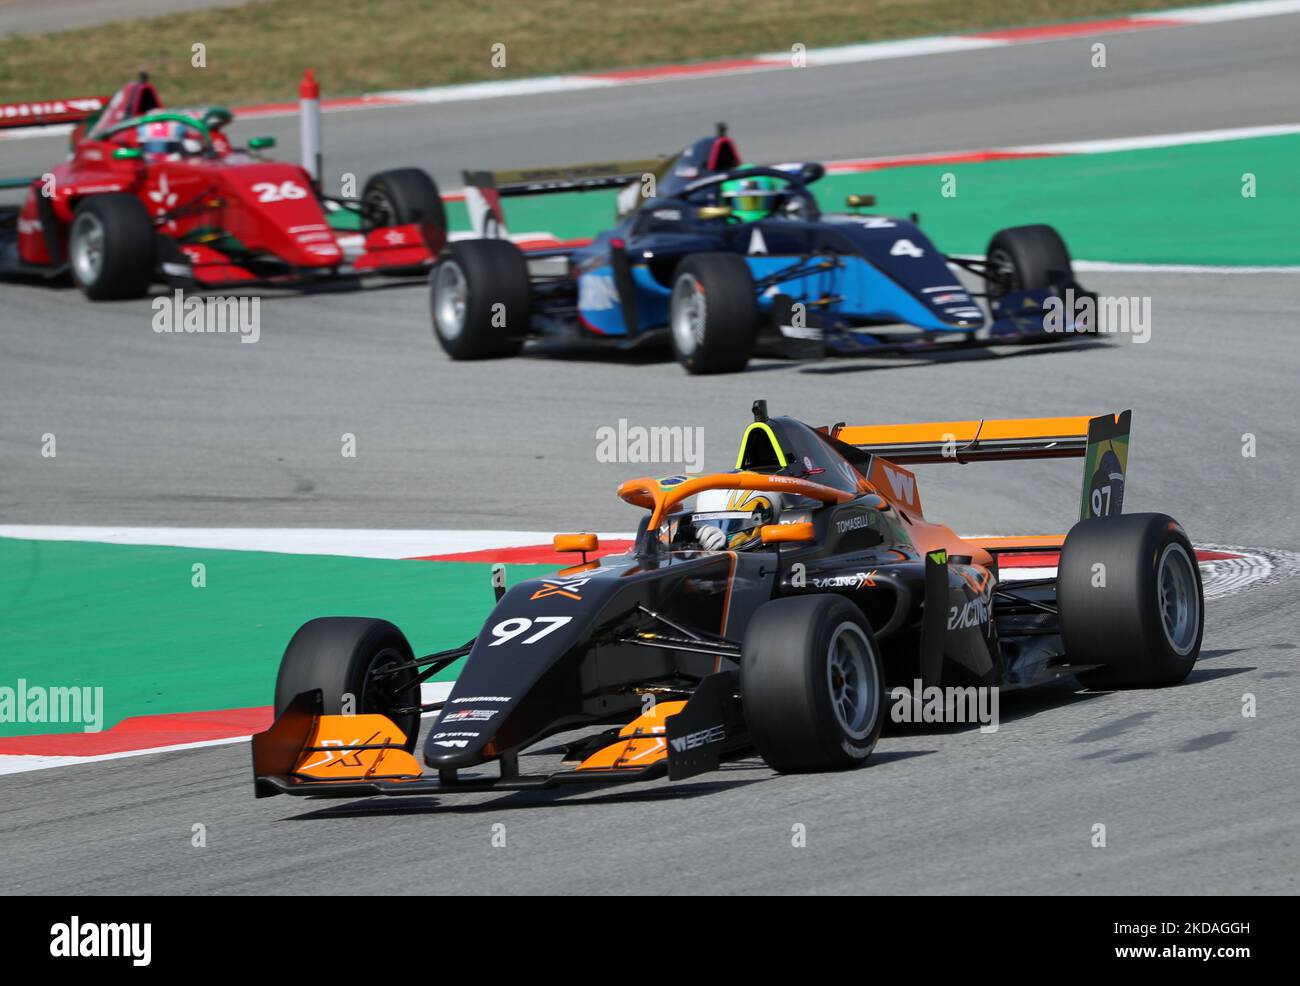 Bruna Tomaselli, from Racing X, during the W Series free practice during the Formula 1 Pirelli GP of Spain, held at the Barcelona-Catalunya Circuit, in Barcelona, on 20th May 2022. -- (Photo by Urbanandsport/NurPhoto) Stock Photo